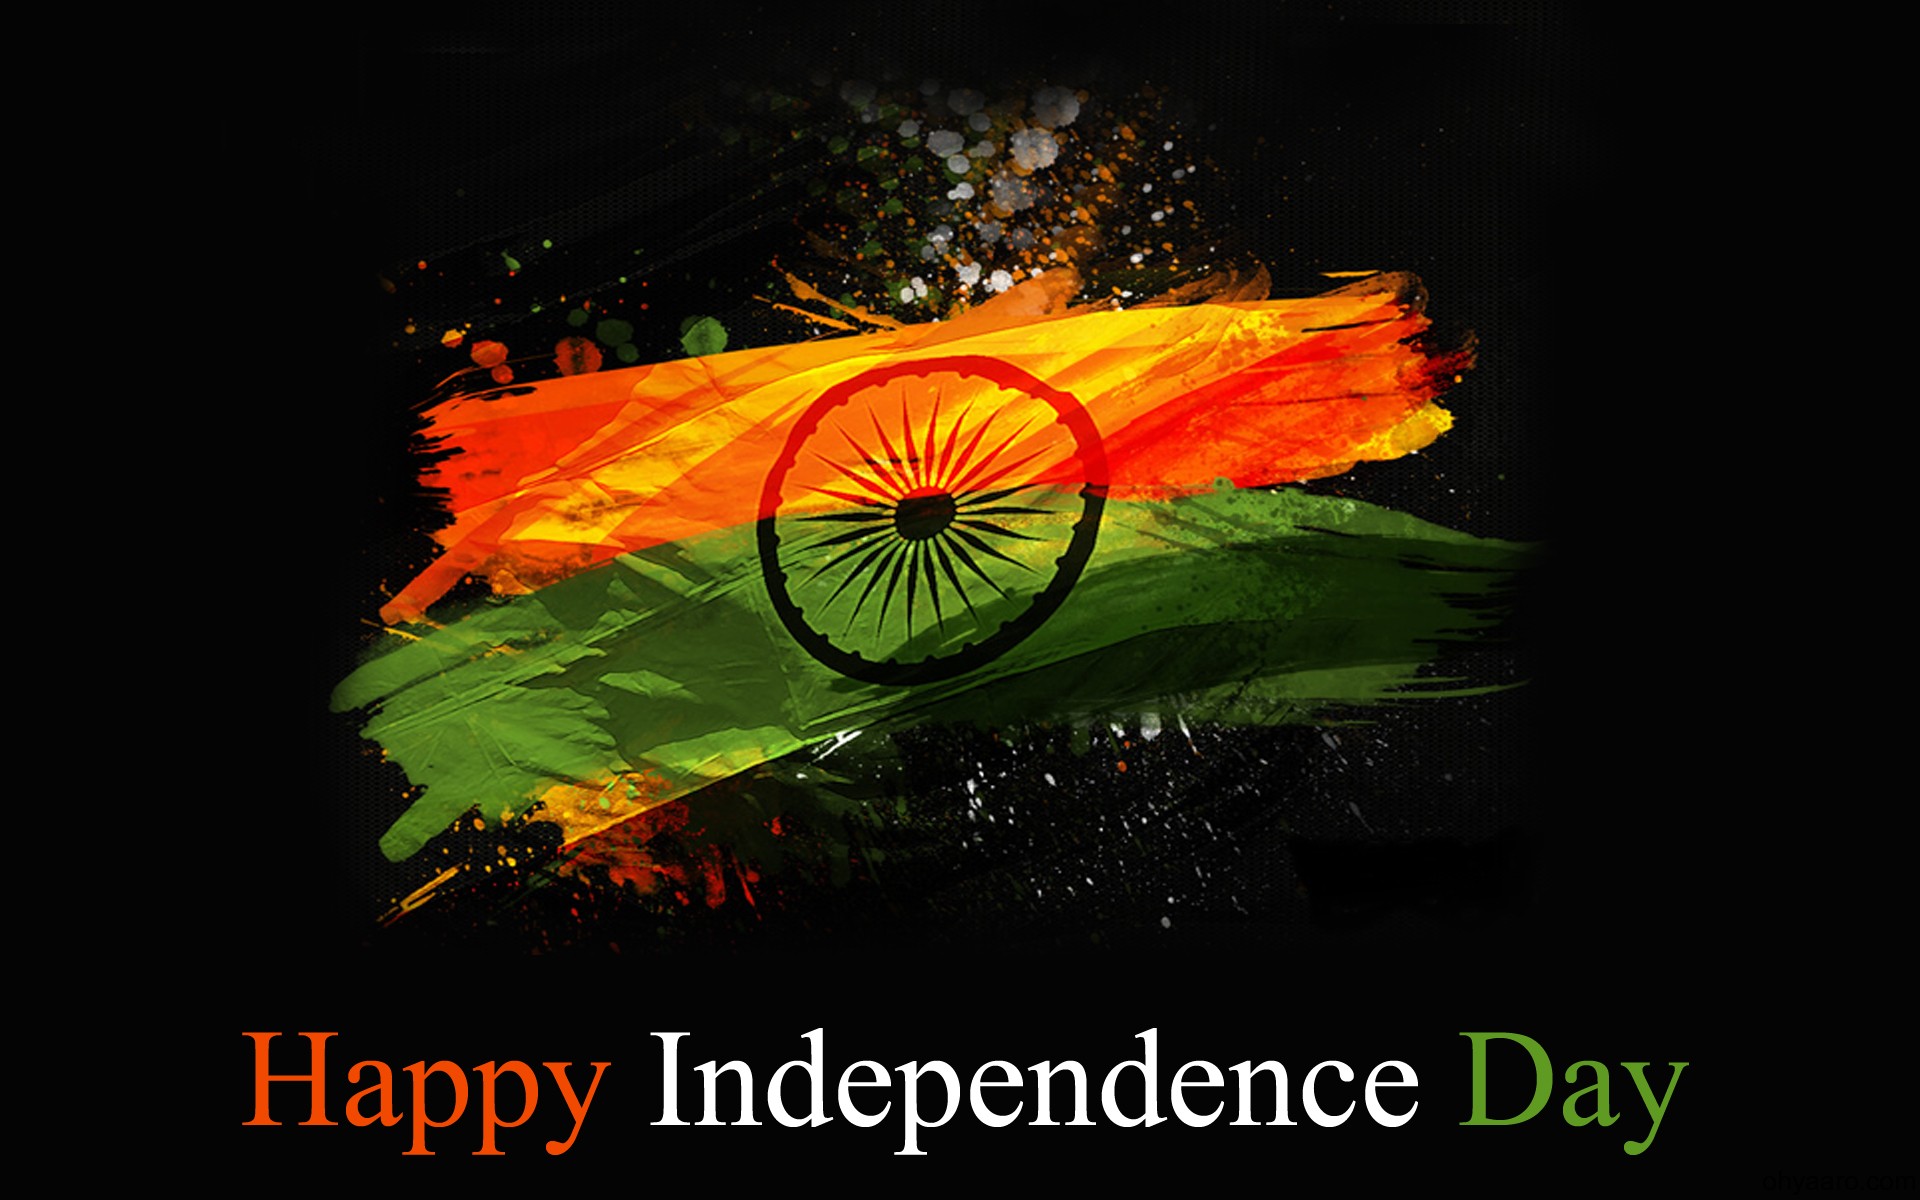 Independence Day Image 2019 - Independence Day Picture - Happy Independence  Day HD Wallpapers